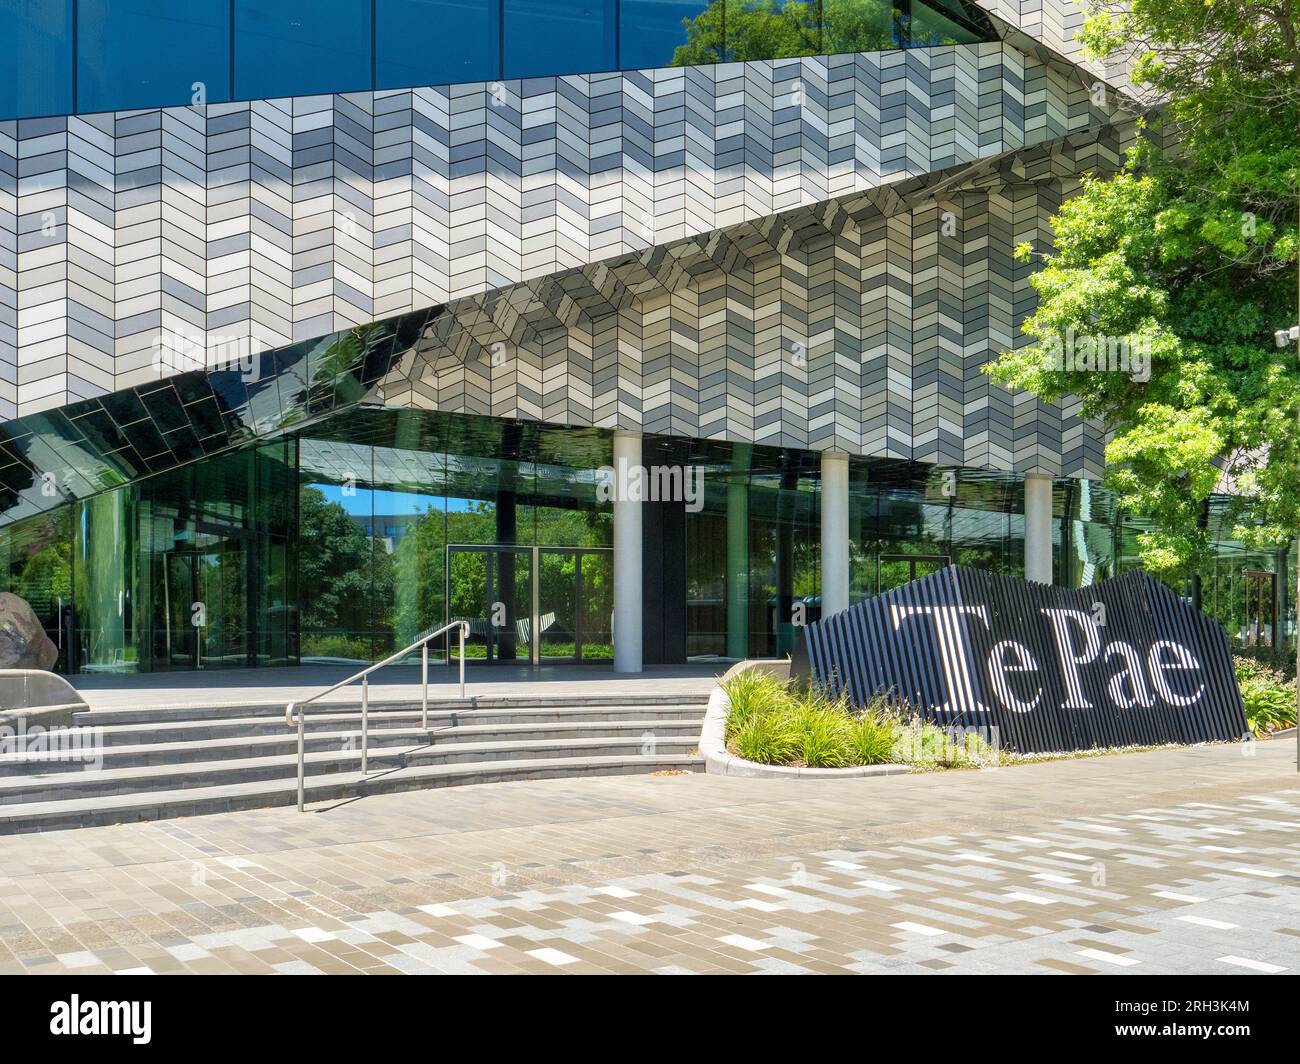 29 December 2022: Christchurch, Canterbury, New Zealand - The Armagh Street entrance to Te Pae Convention Centre, a central part of Christchurch's... Stock Photo